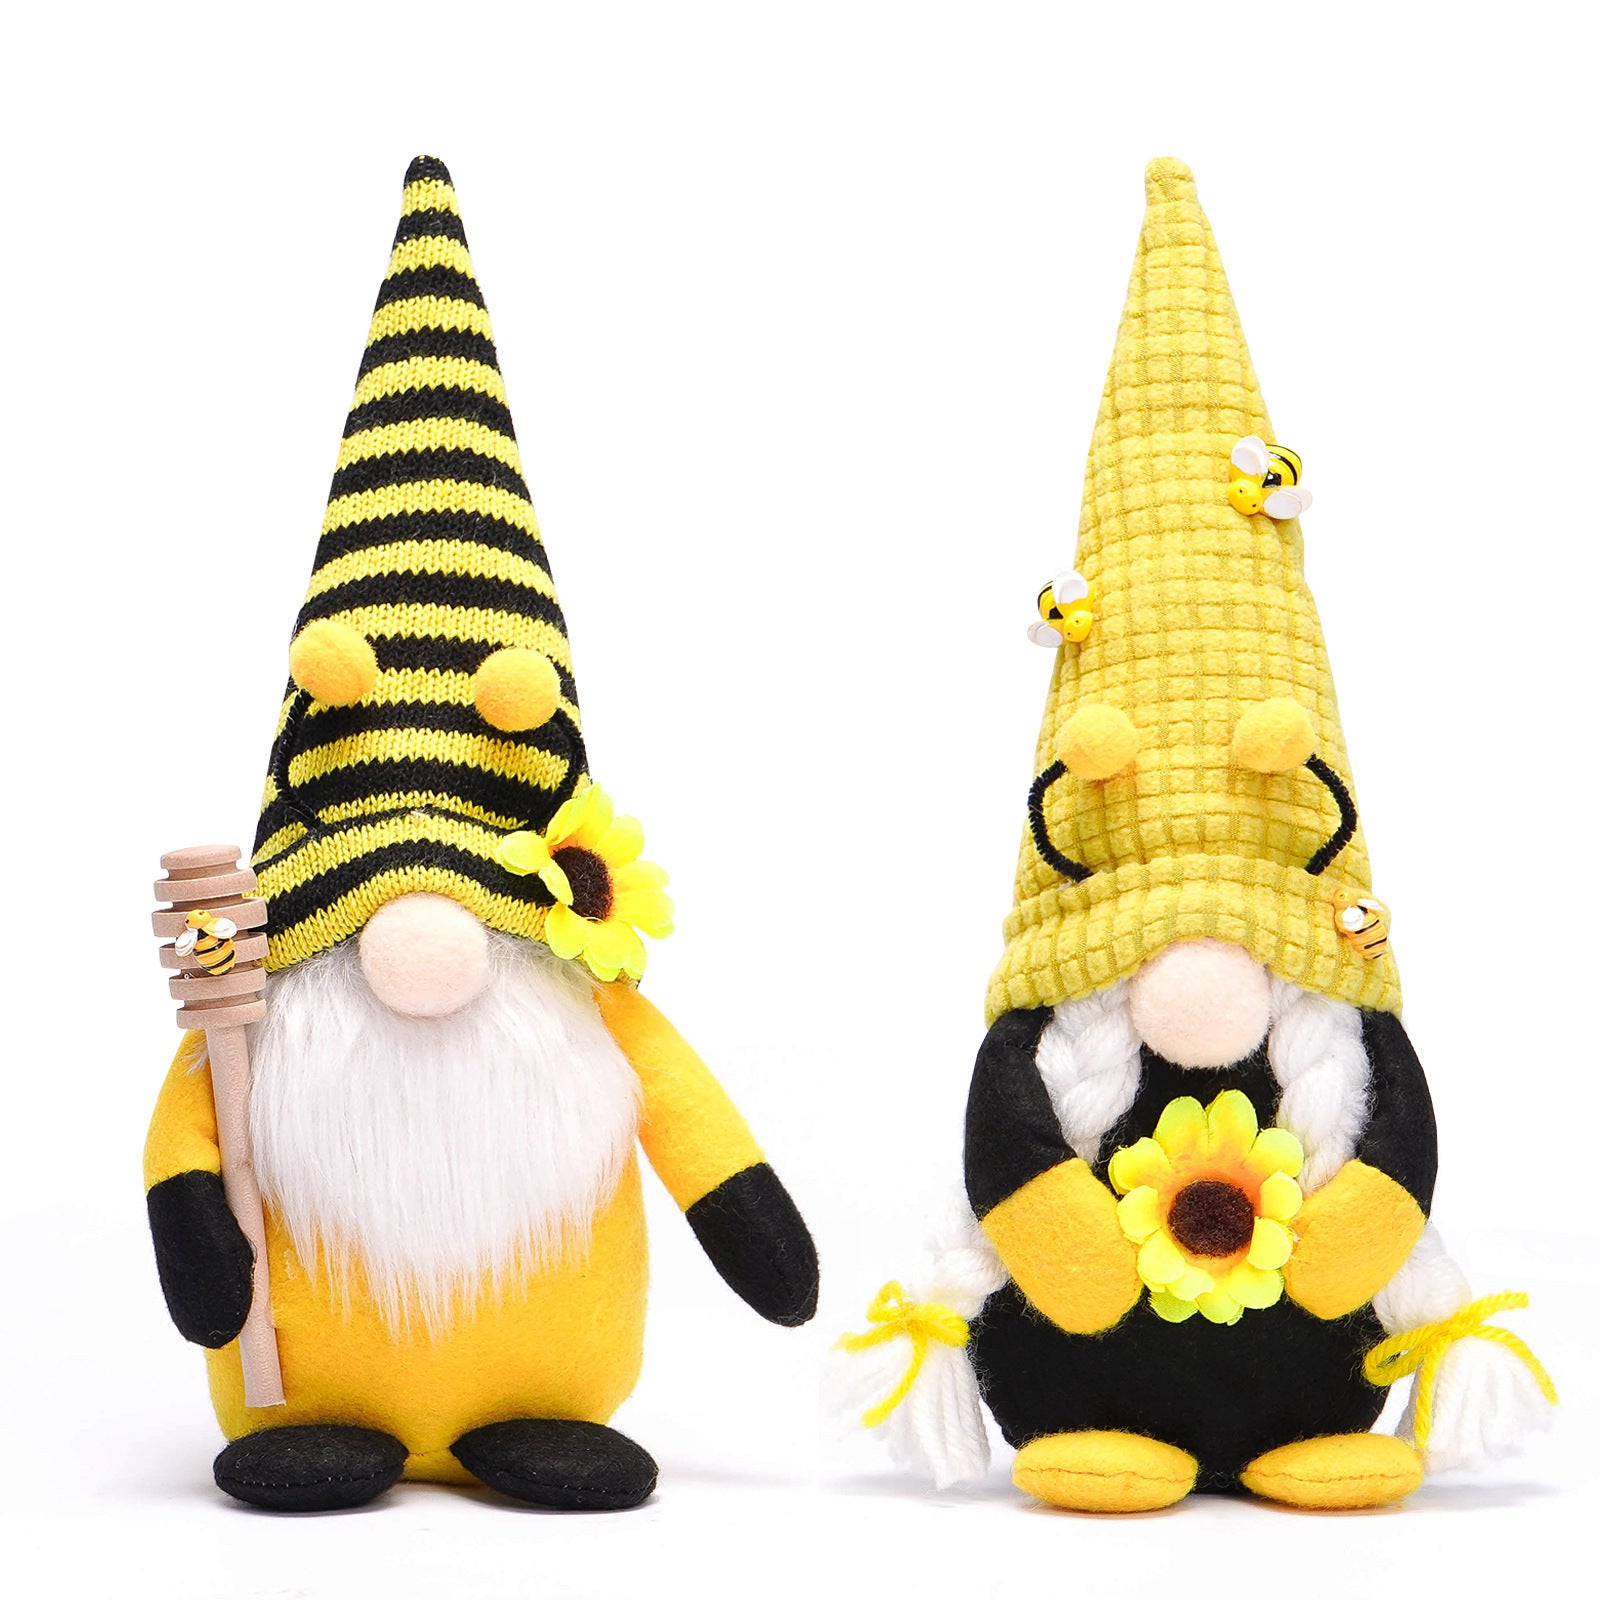 Bee Festival Faceless Doll Cute Sunflower Rudolf Doll Ornaments Holiday Decorations, Bee gnomes, Beekeeper gnomes, Honey gnomes, Bumblebee gnomes, Beehive gnomes, Pollen gnomes, Garden gnomes, Spring gnomes, Flower gnomes, Nature gnomes, Decorative gnomes, Rustic gnomes, Festive gnomes, Yellow and black gnomes, Bee-friendly gnomes, Happy bees gnomes,